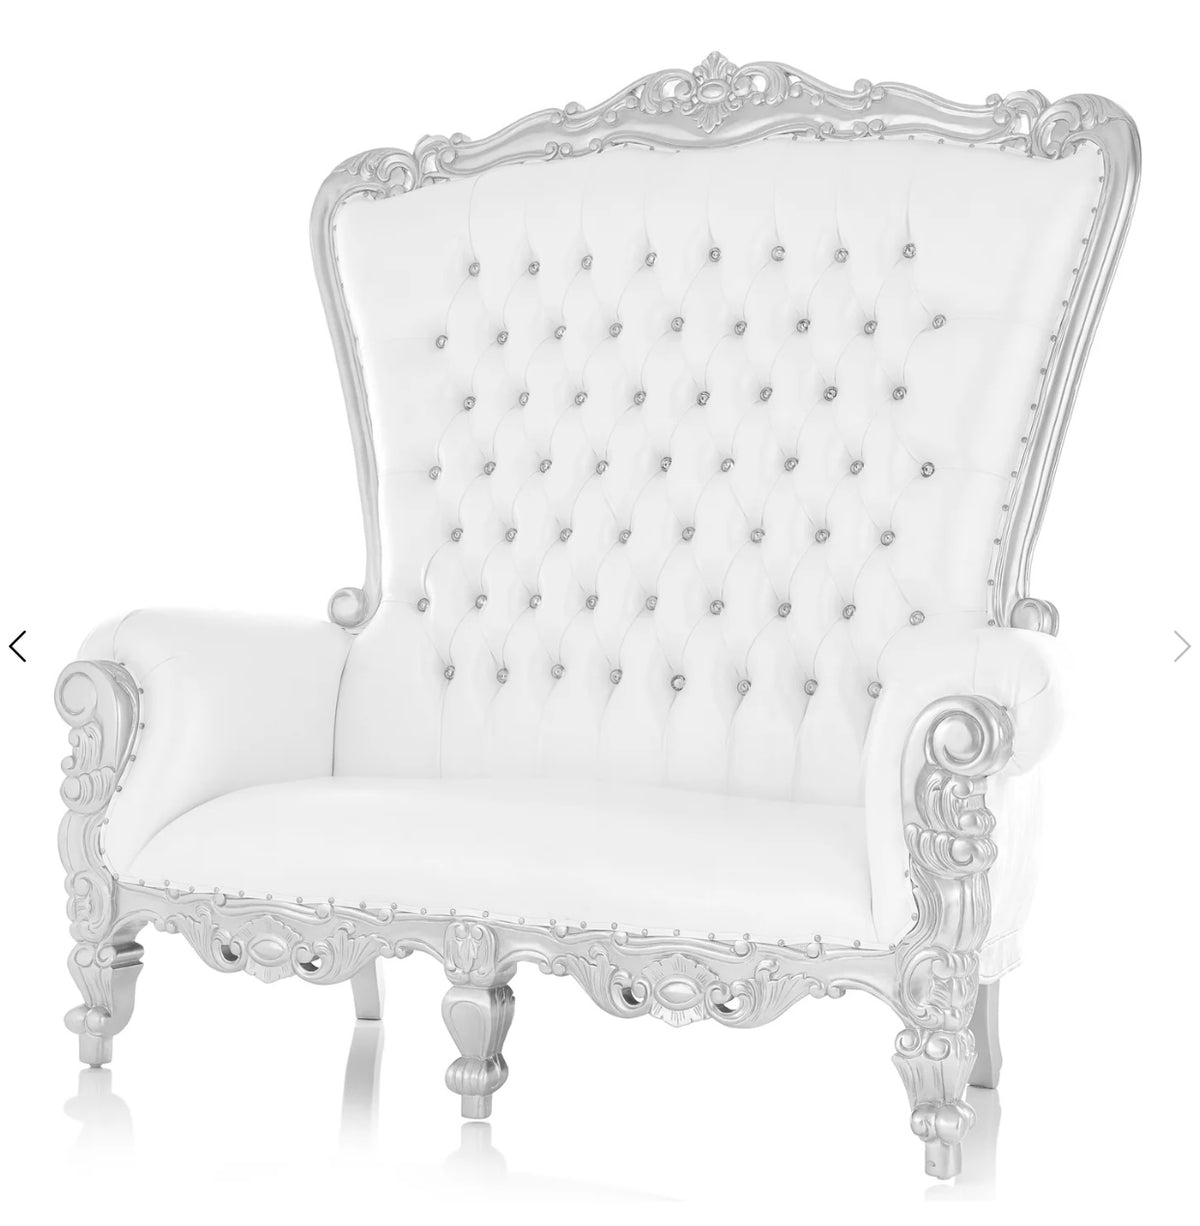 Adult Double White/Silver Royal Throne Sofa